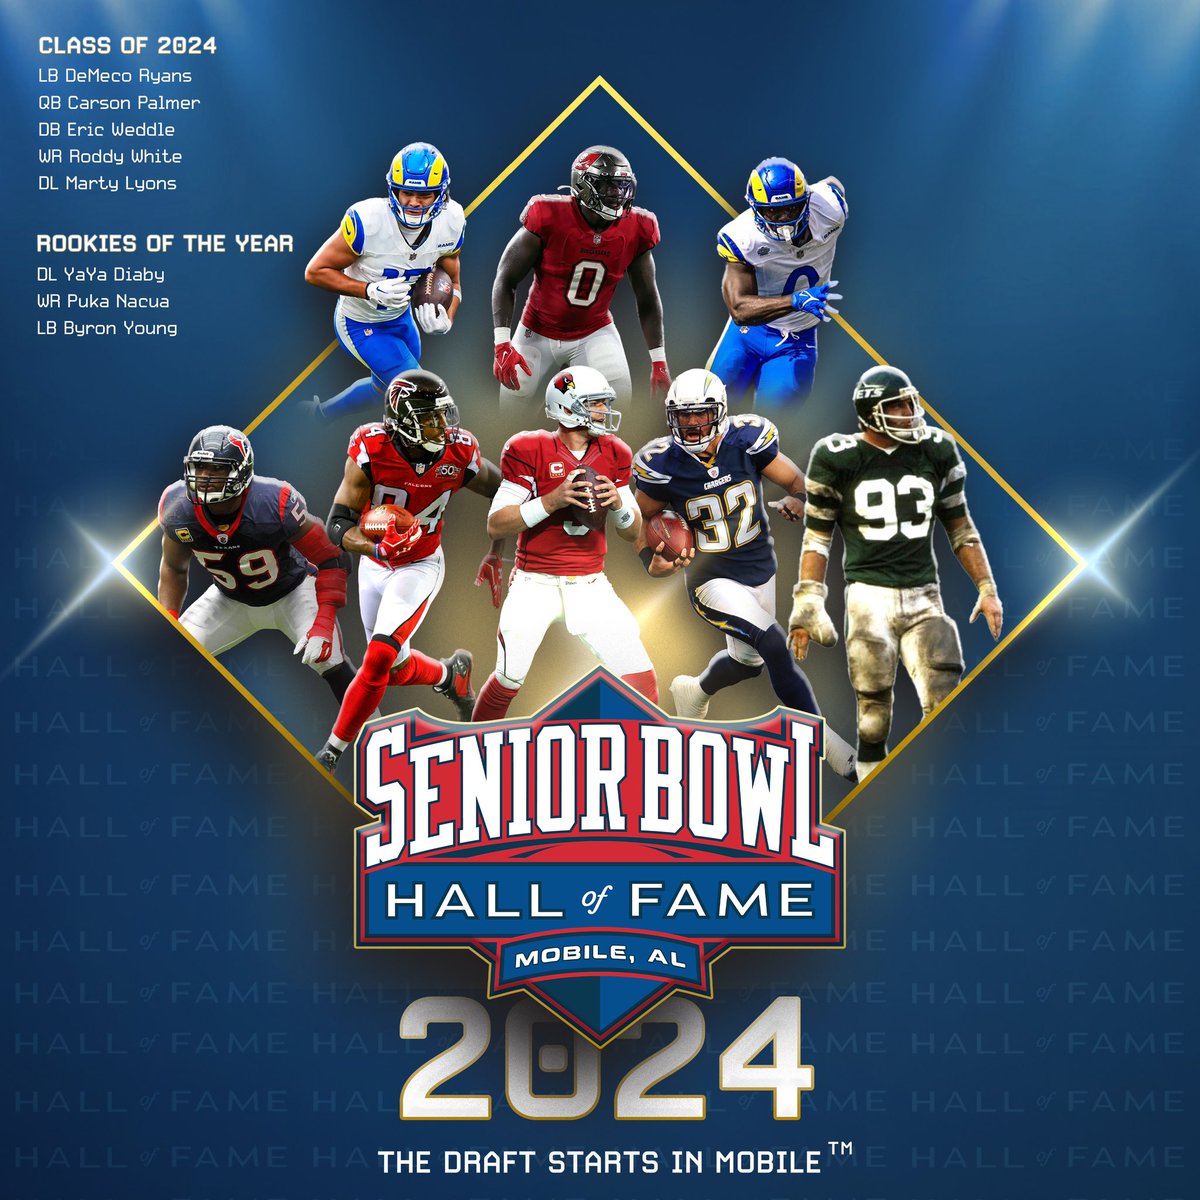 The Senior Bowl Hall of Fame Class of 2024! LB DeMeco Ryans #Texans QB Carson Palmer #Cardinals DB Eric Weddle #Chargers WR Roddy White #Falcons DL Marty Lyons #Jets DL YaYa Diaby #Buccaneers WR Puka Nacua #Rams LB Byron Young #Rams #TheDraftStartsInMOBILE™️ #SBHOF2024